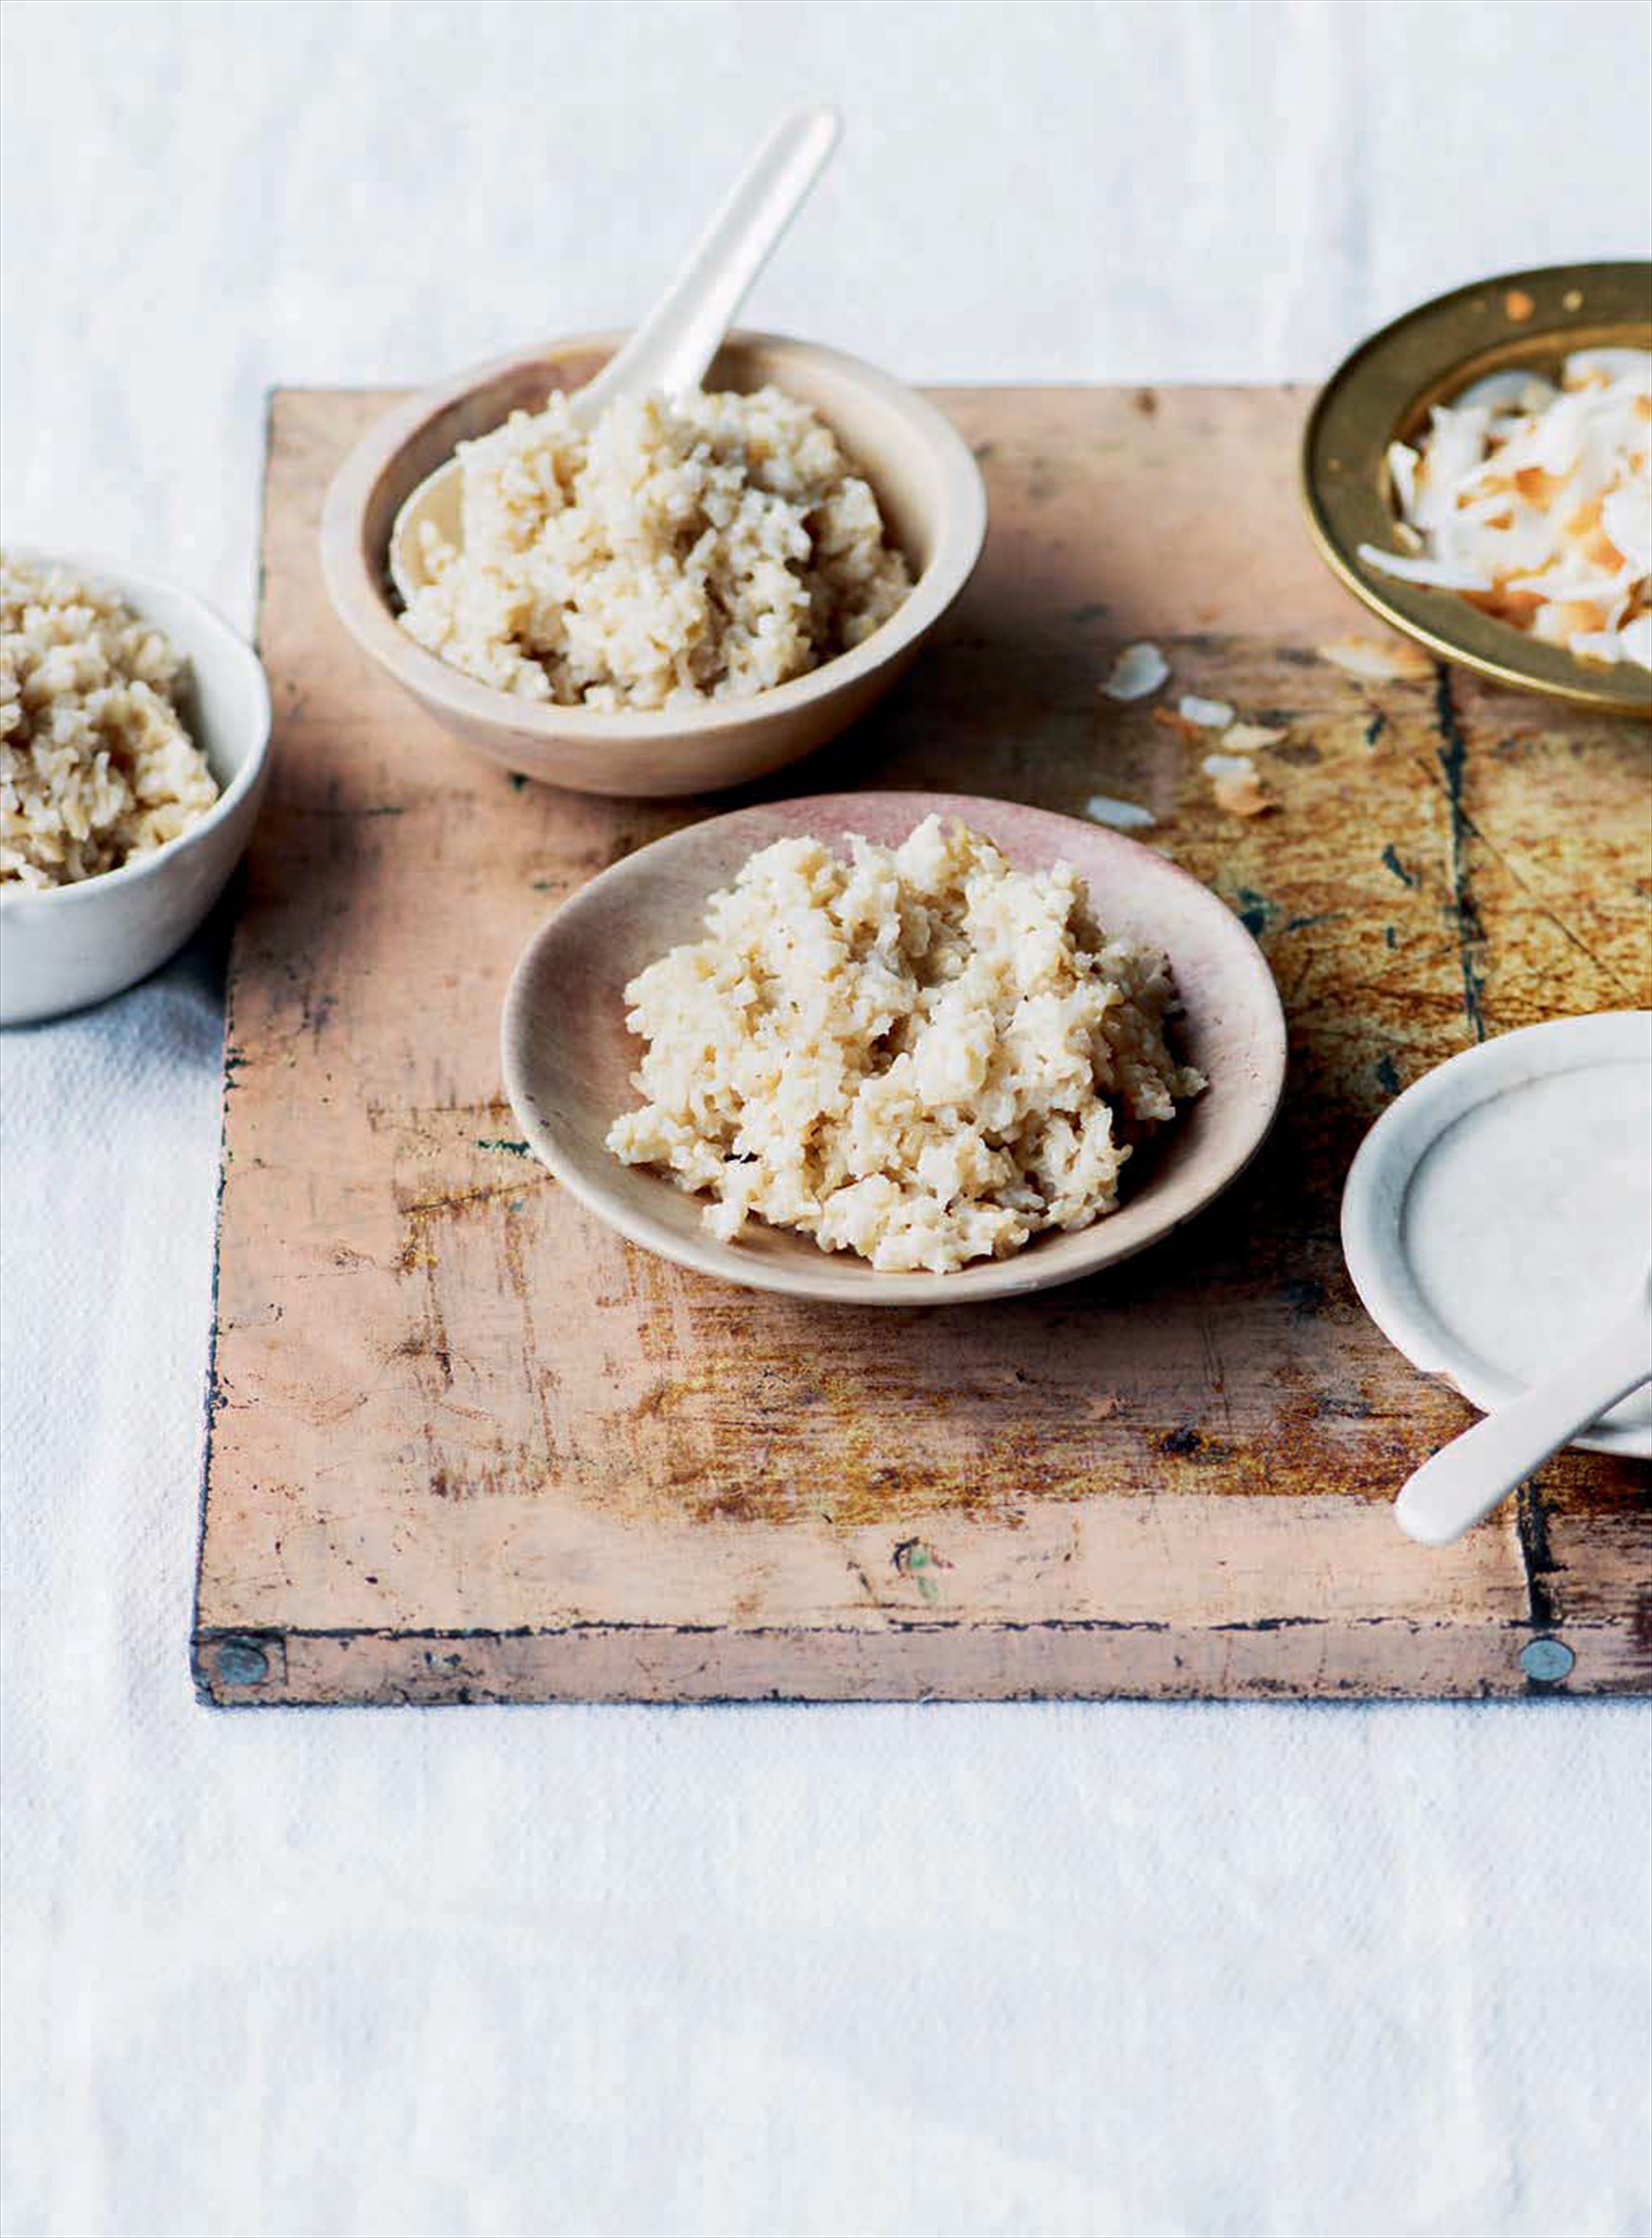 Asian-style coconut rice